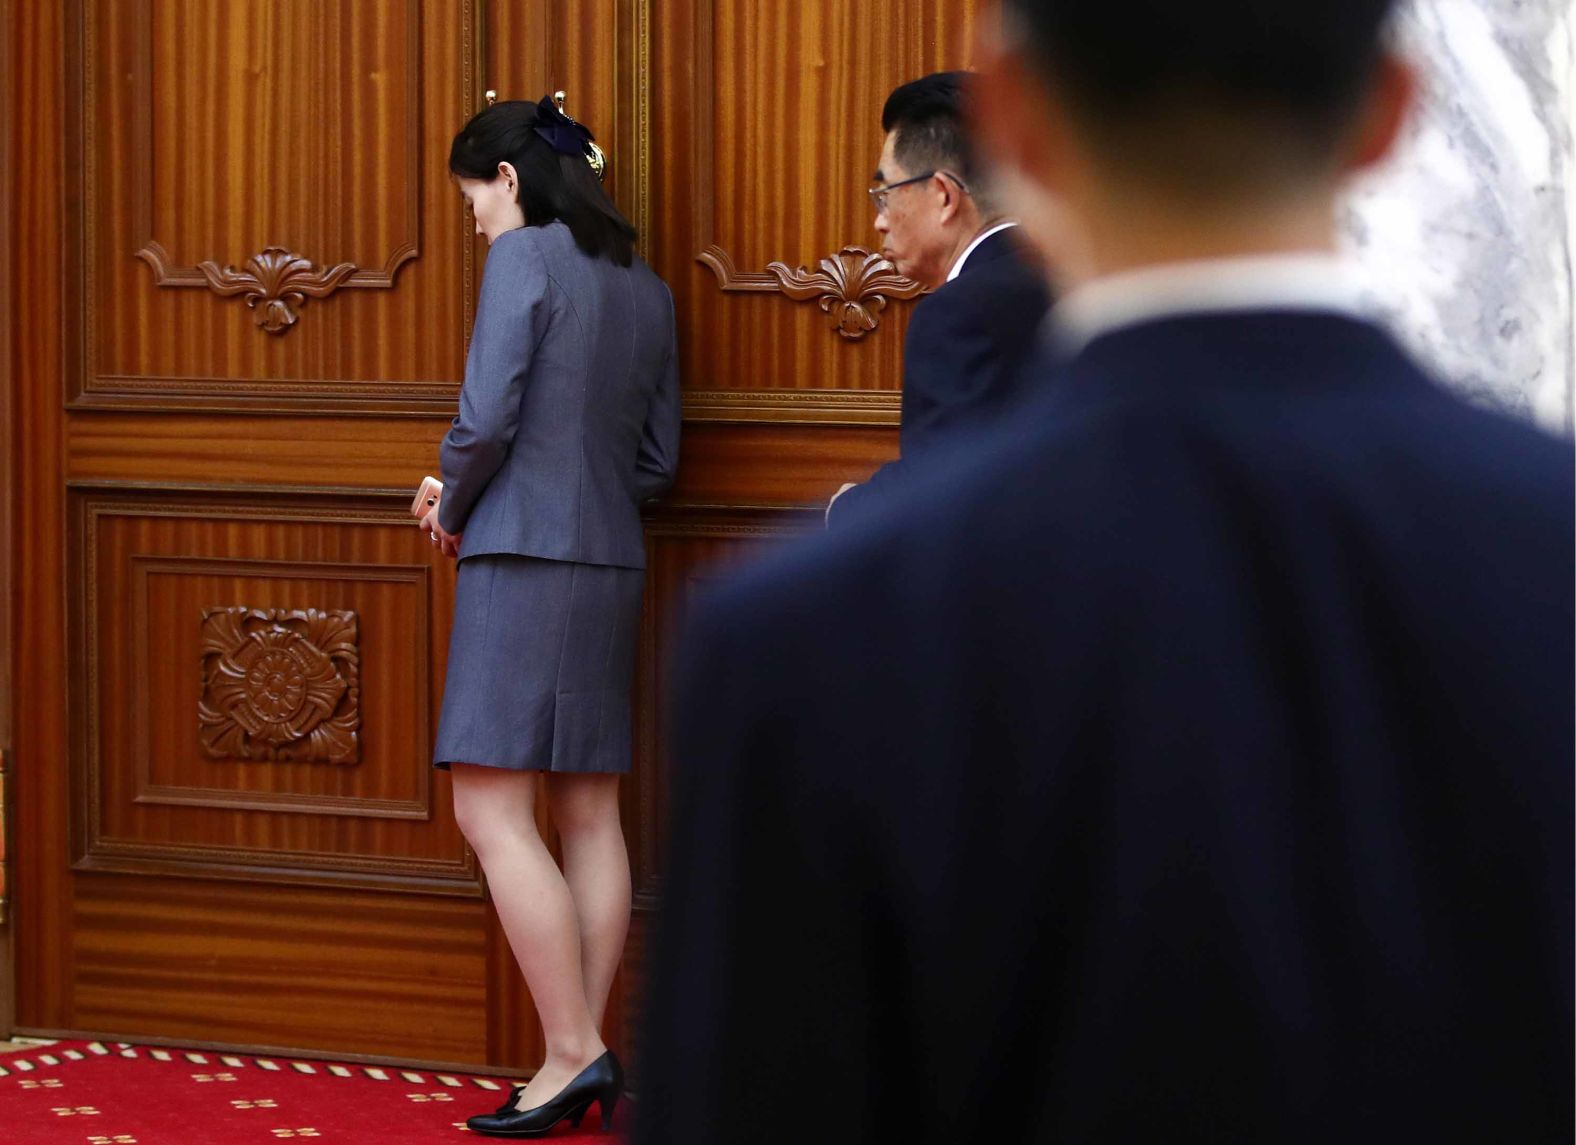 Kim Yo Jong and security guards stand near a door during the meeting of Kim and Lavrov.